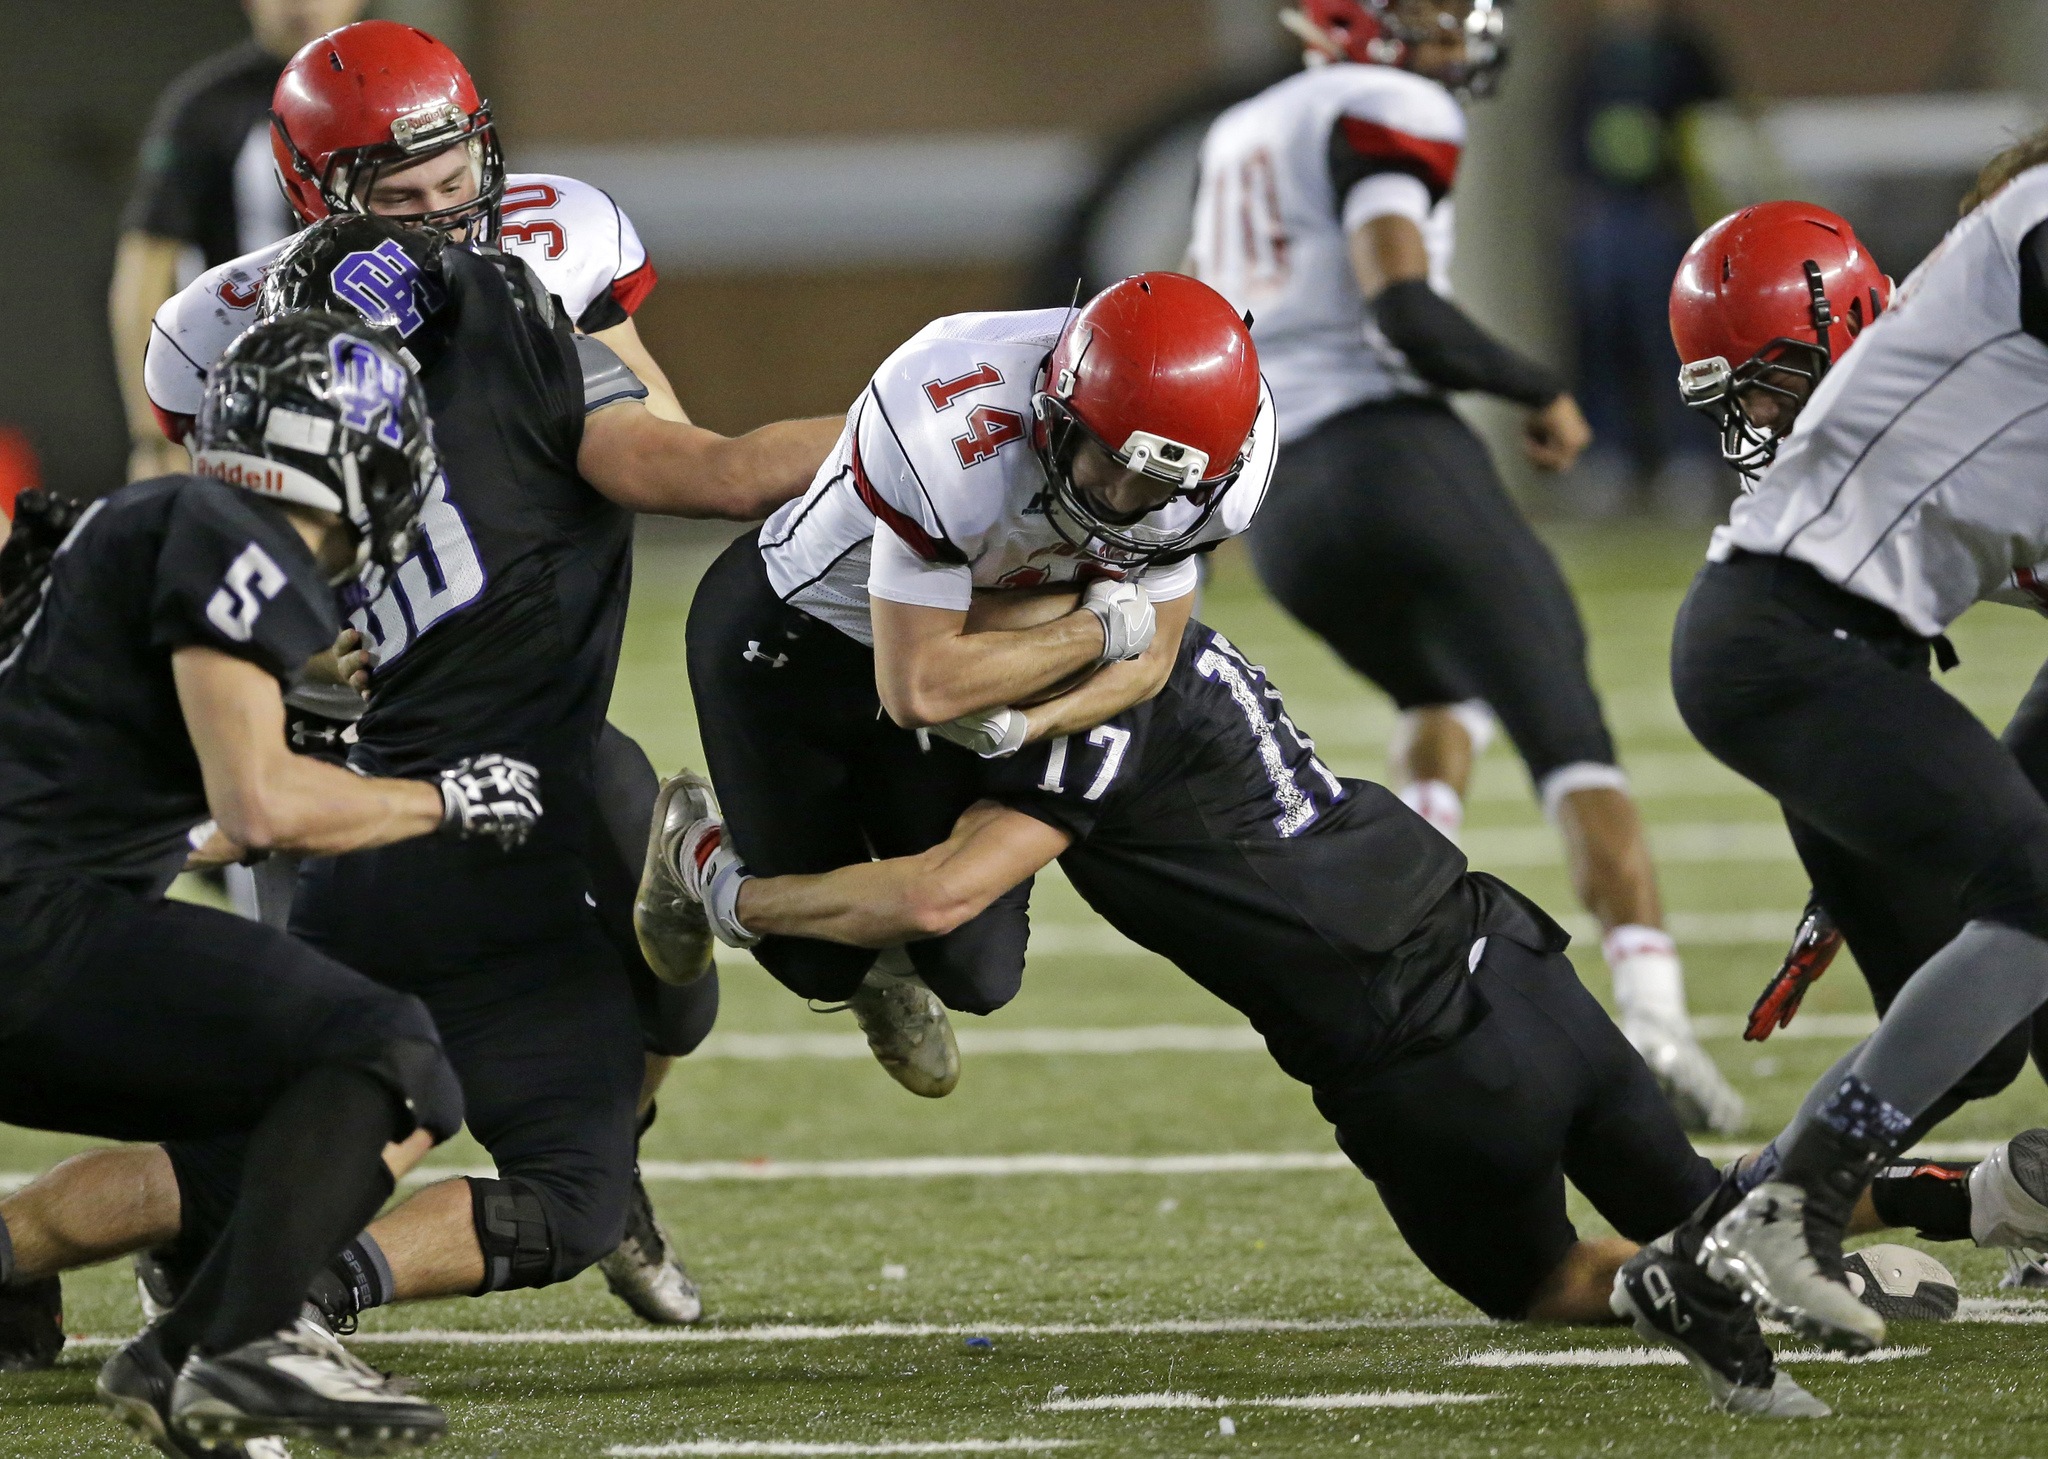 The Associated Press Neah Bay’s Cameron Buzzell (14) is tackled by Odessa-Harrington defensive linebacker John DeWulf (17) as he leaps for extra yardage during the Class 1B state football championship on Saturday in Tacoma.